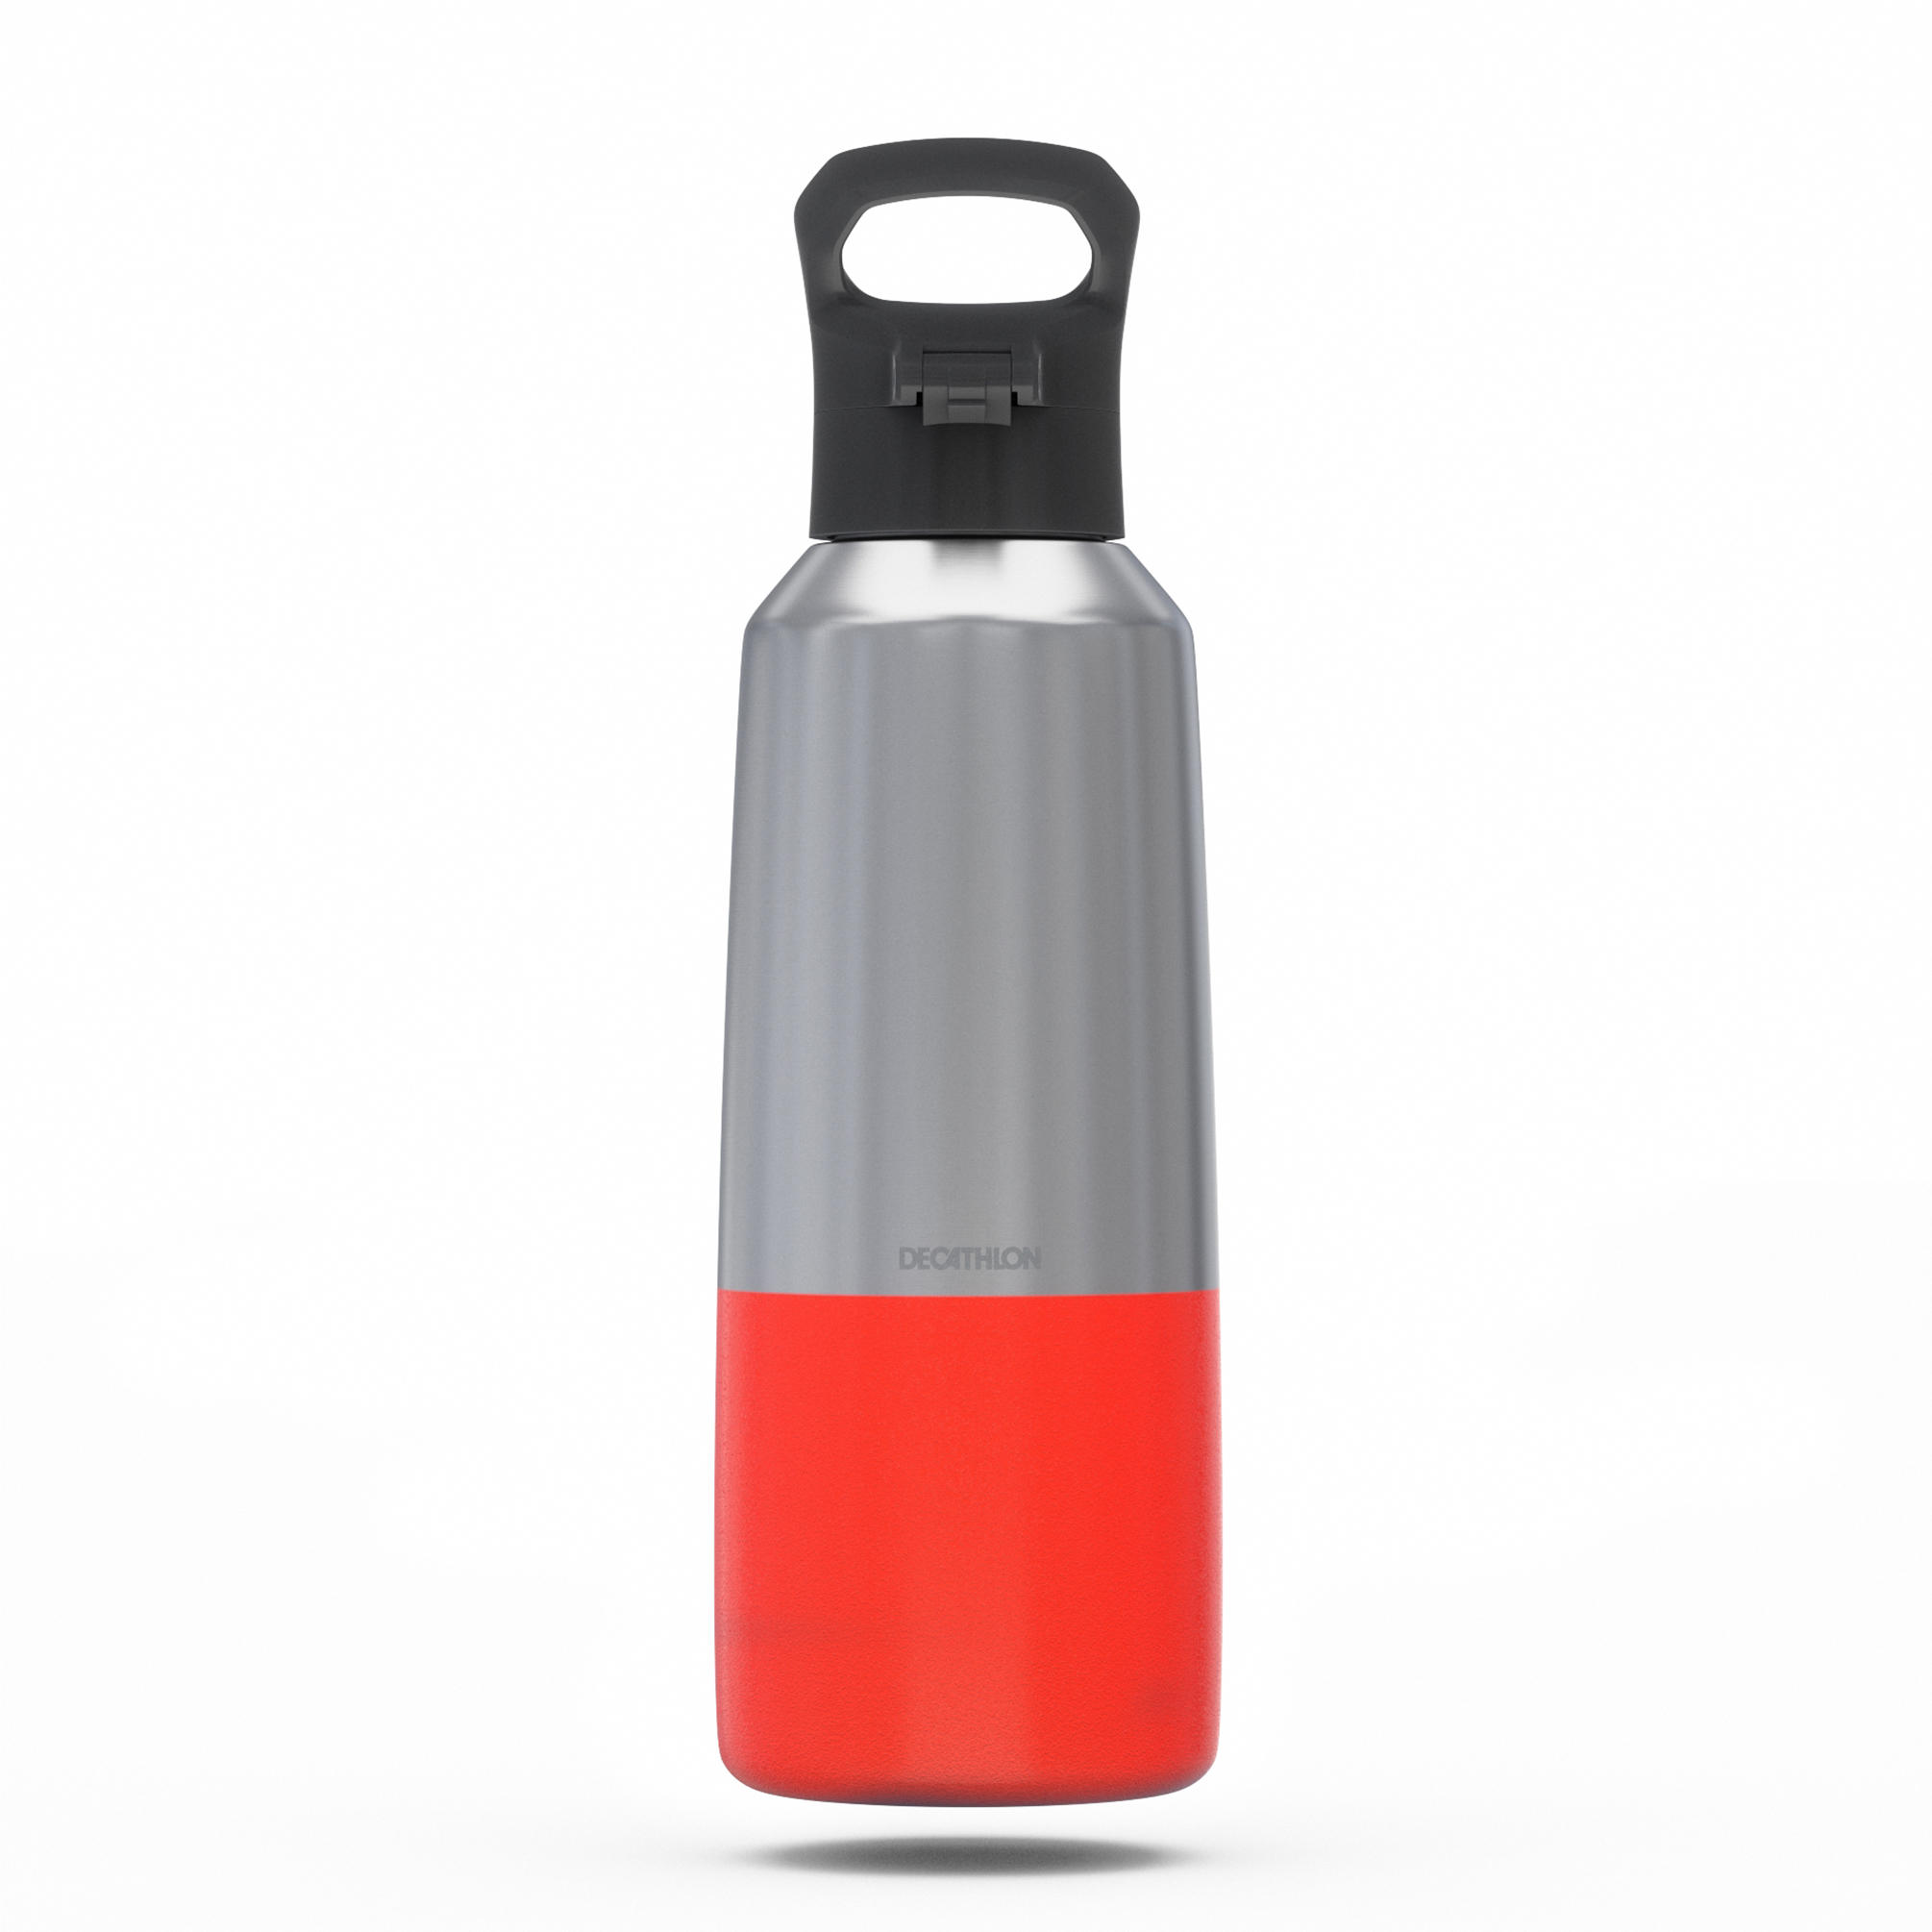 0.8 L stainless steel water bottle with quick-open cap for hiking - Red 28/35